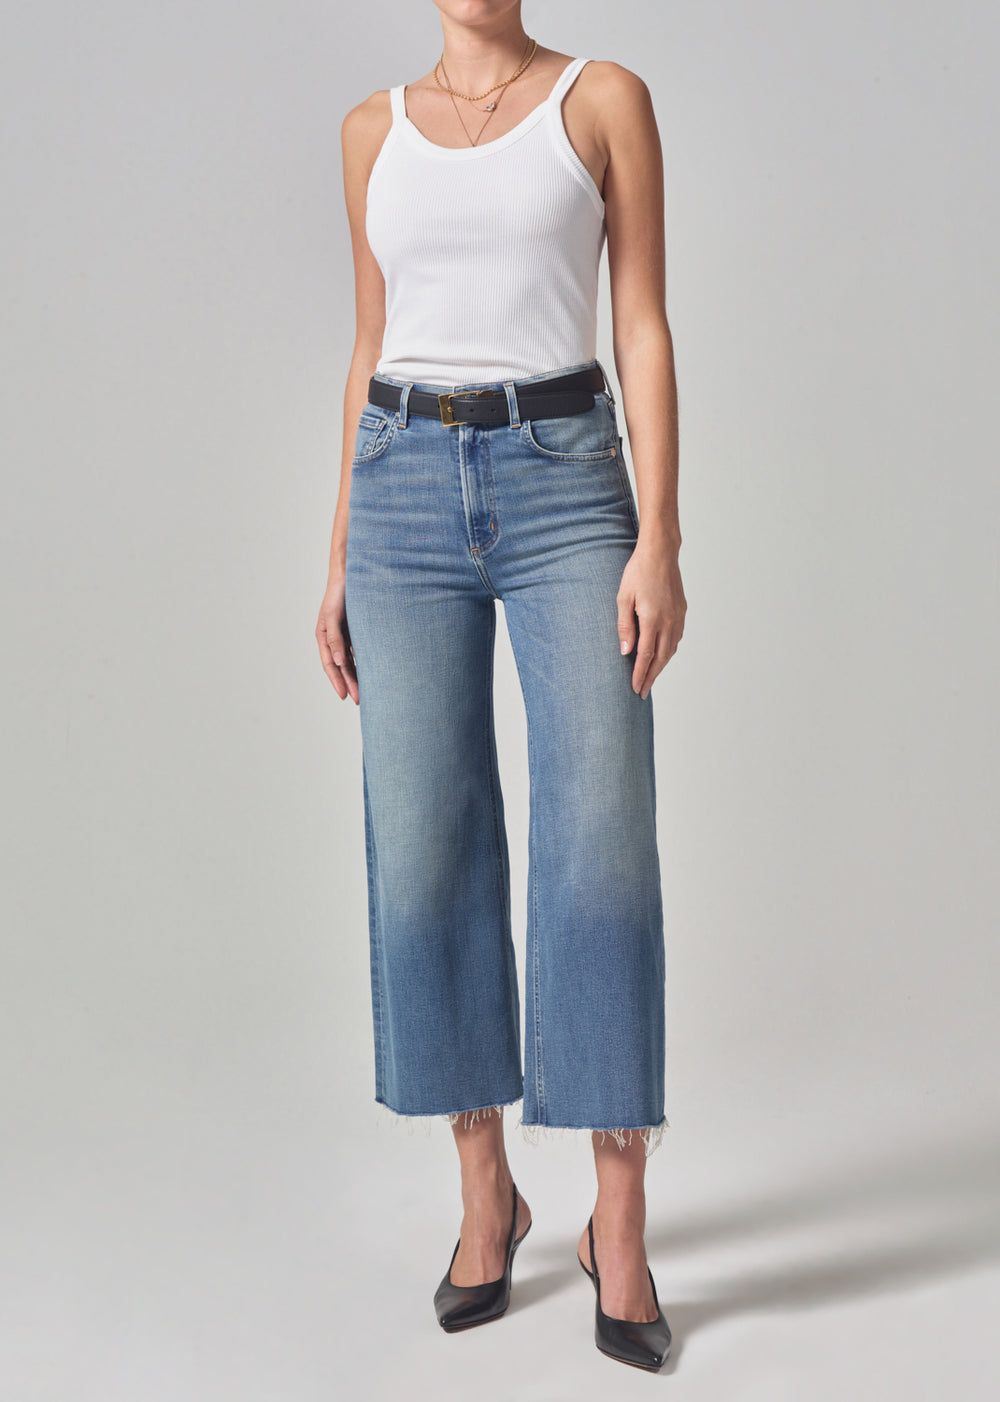 Citizens of Humanity Lyra Wide Leg Crop in Abliss